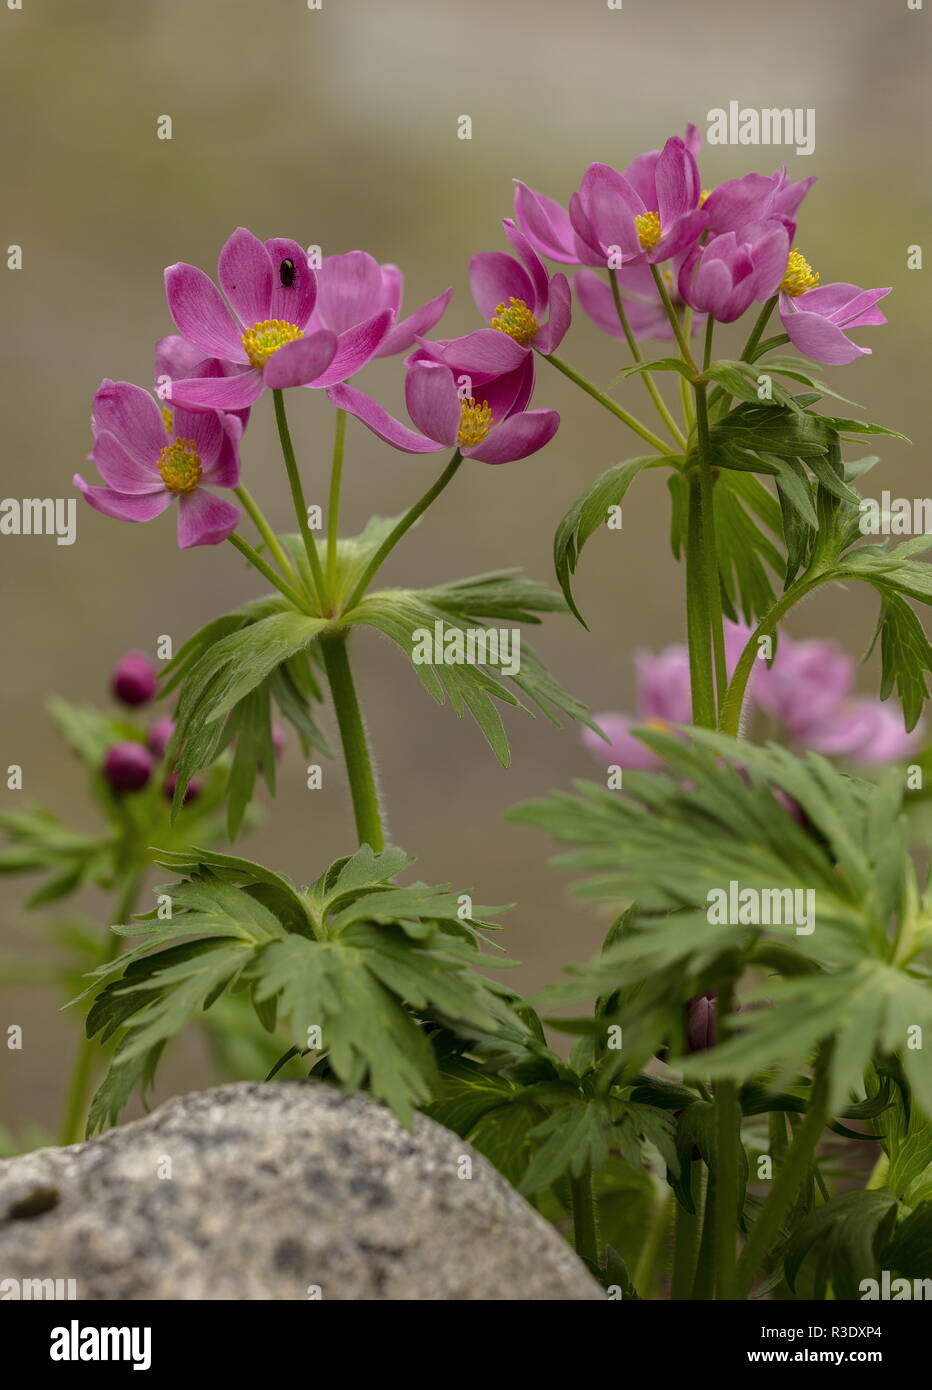 Pink form of Anemone narcissiflora ssp. crinita in flower in garden; from Mongolia-Siberia area. Stock Photo